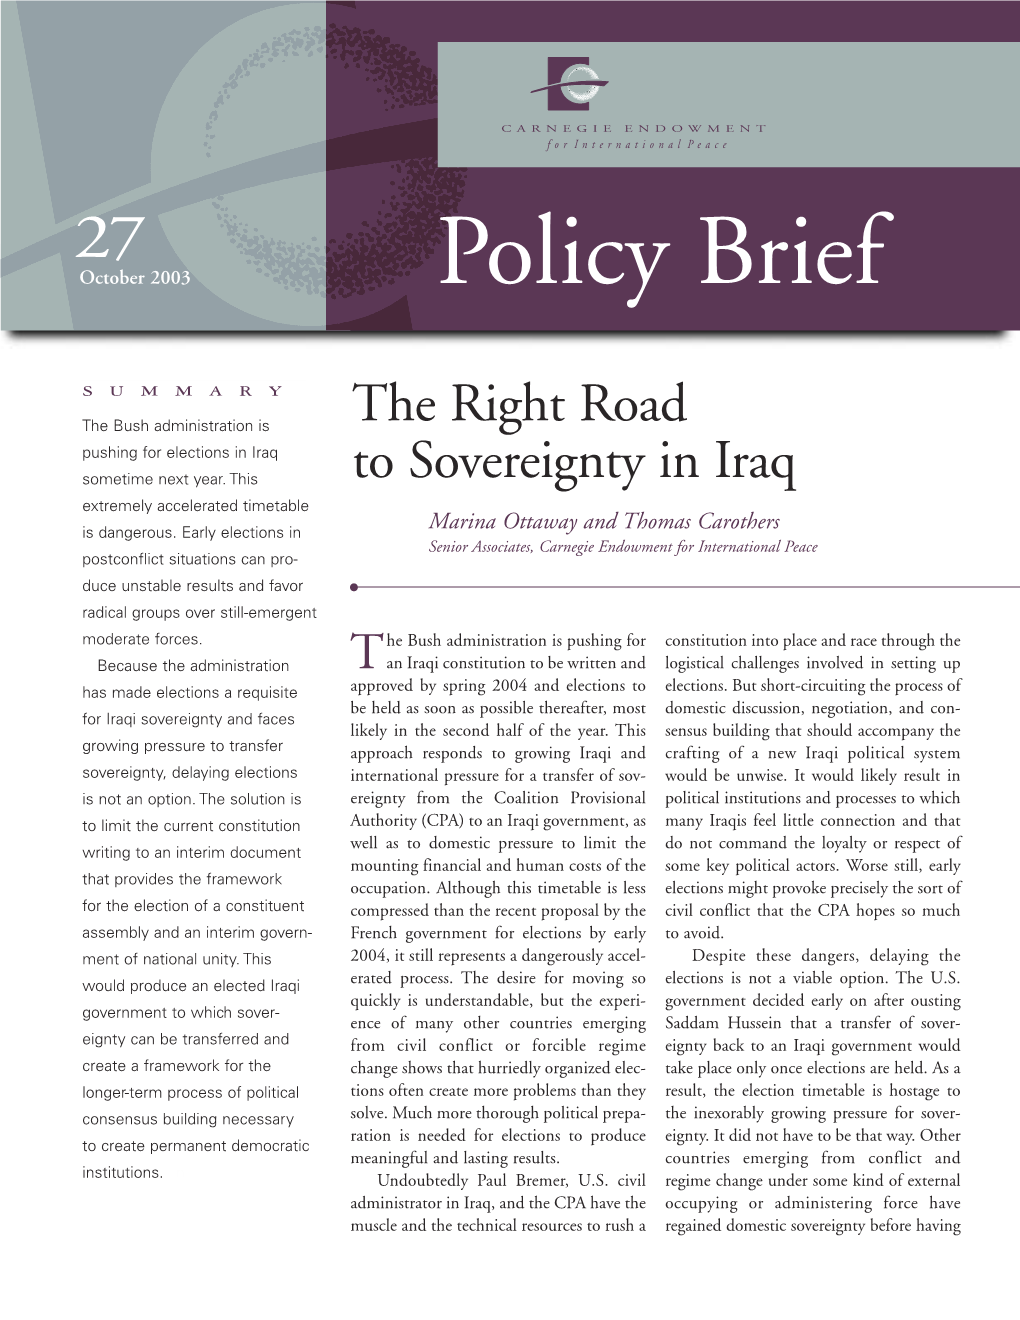 The Right Road to Sovereignty in Iraq